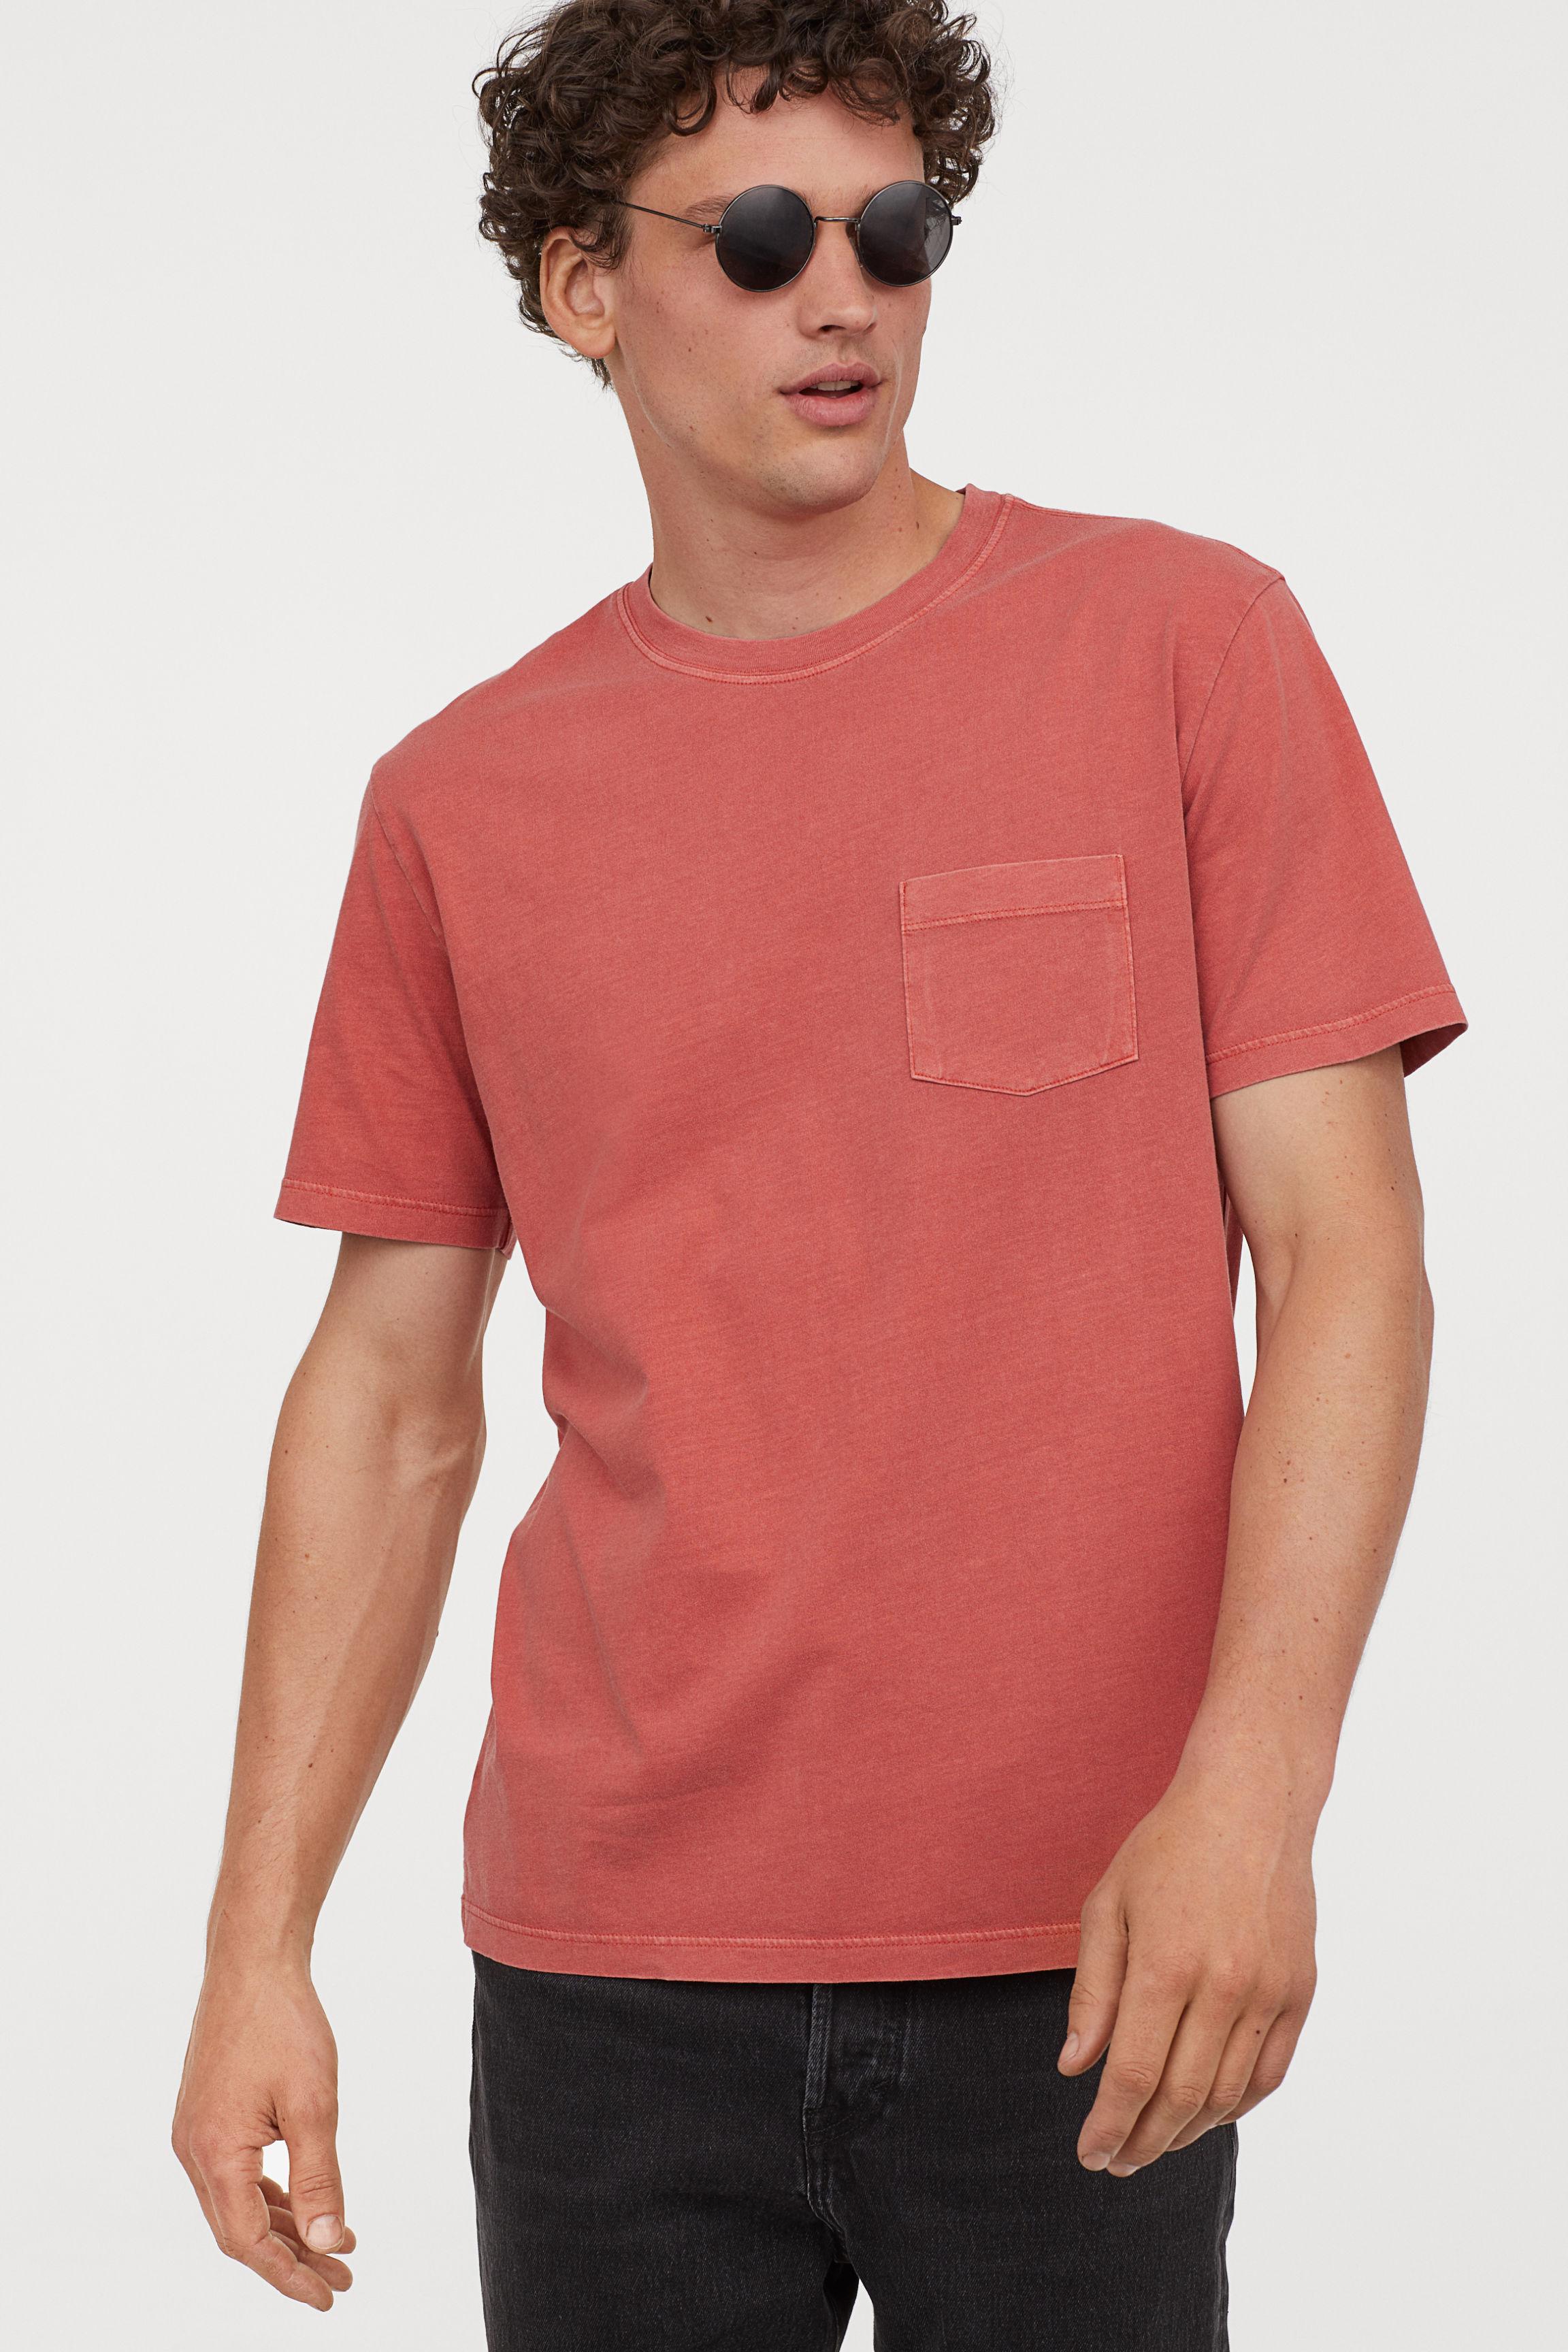 H&M T-shirt With A Chest Pocket in Red for Men - Lyst